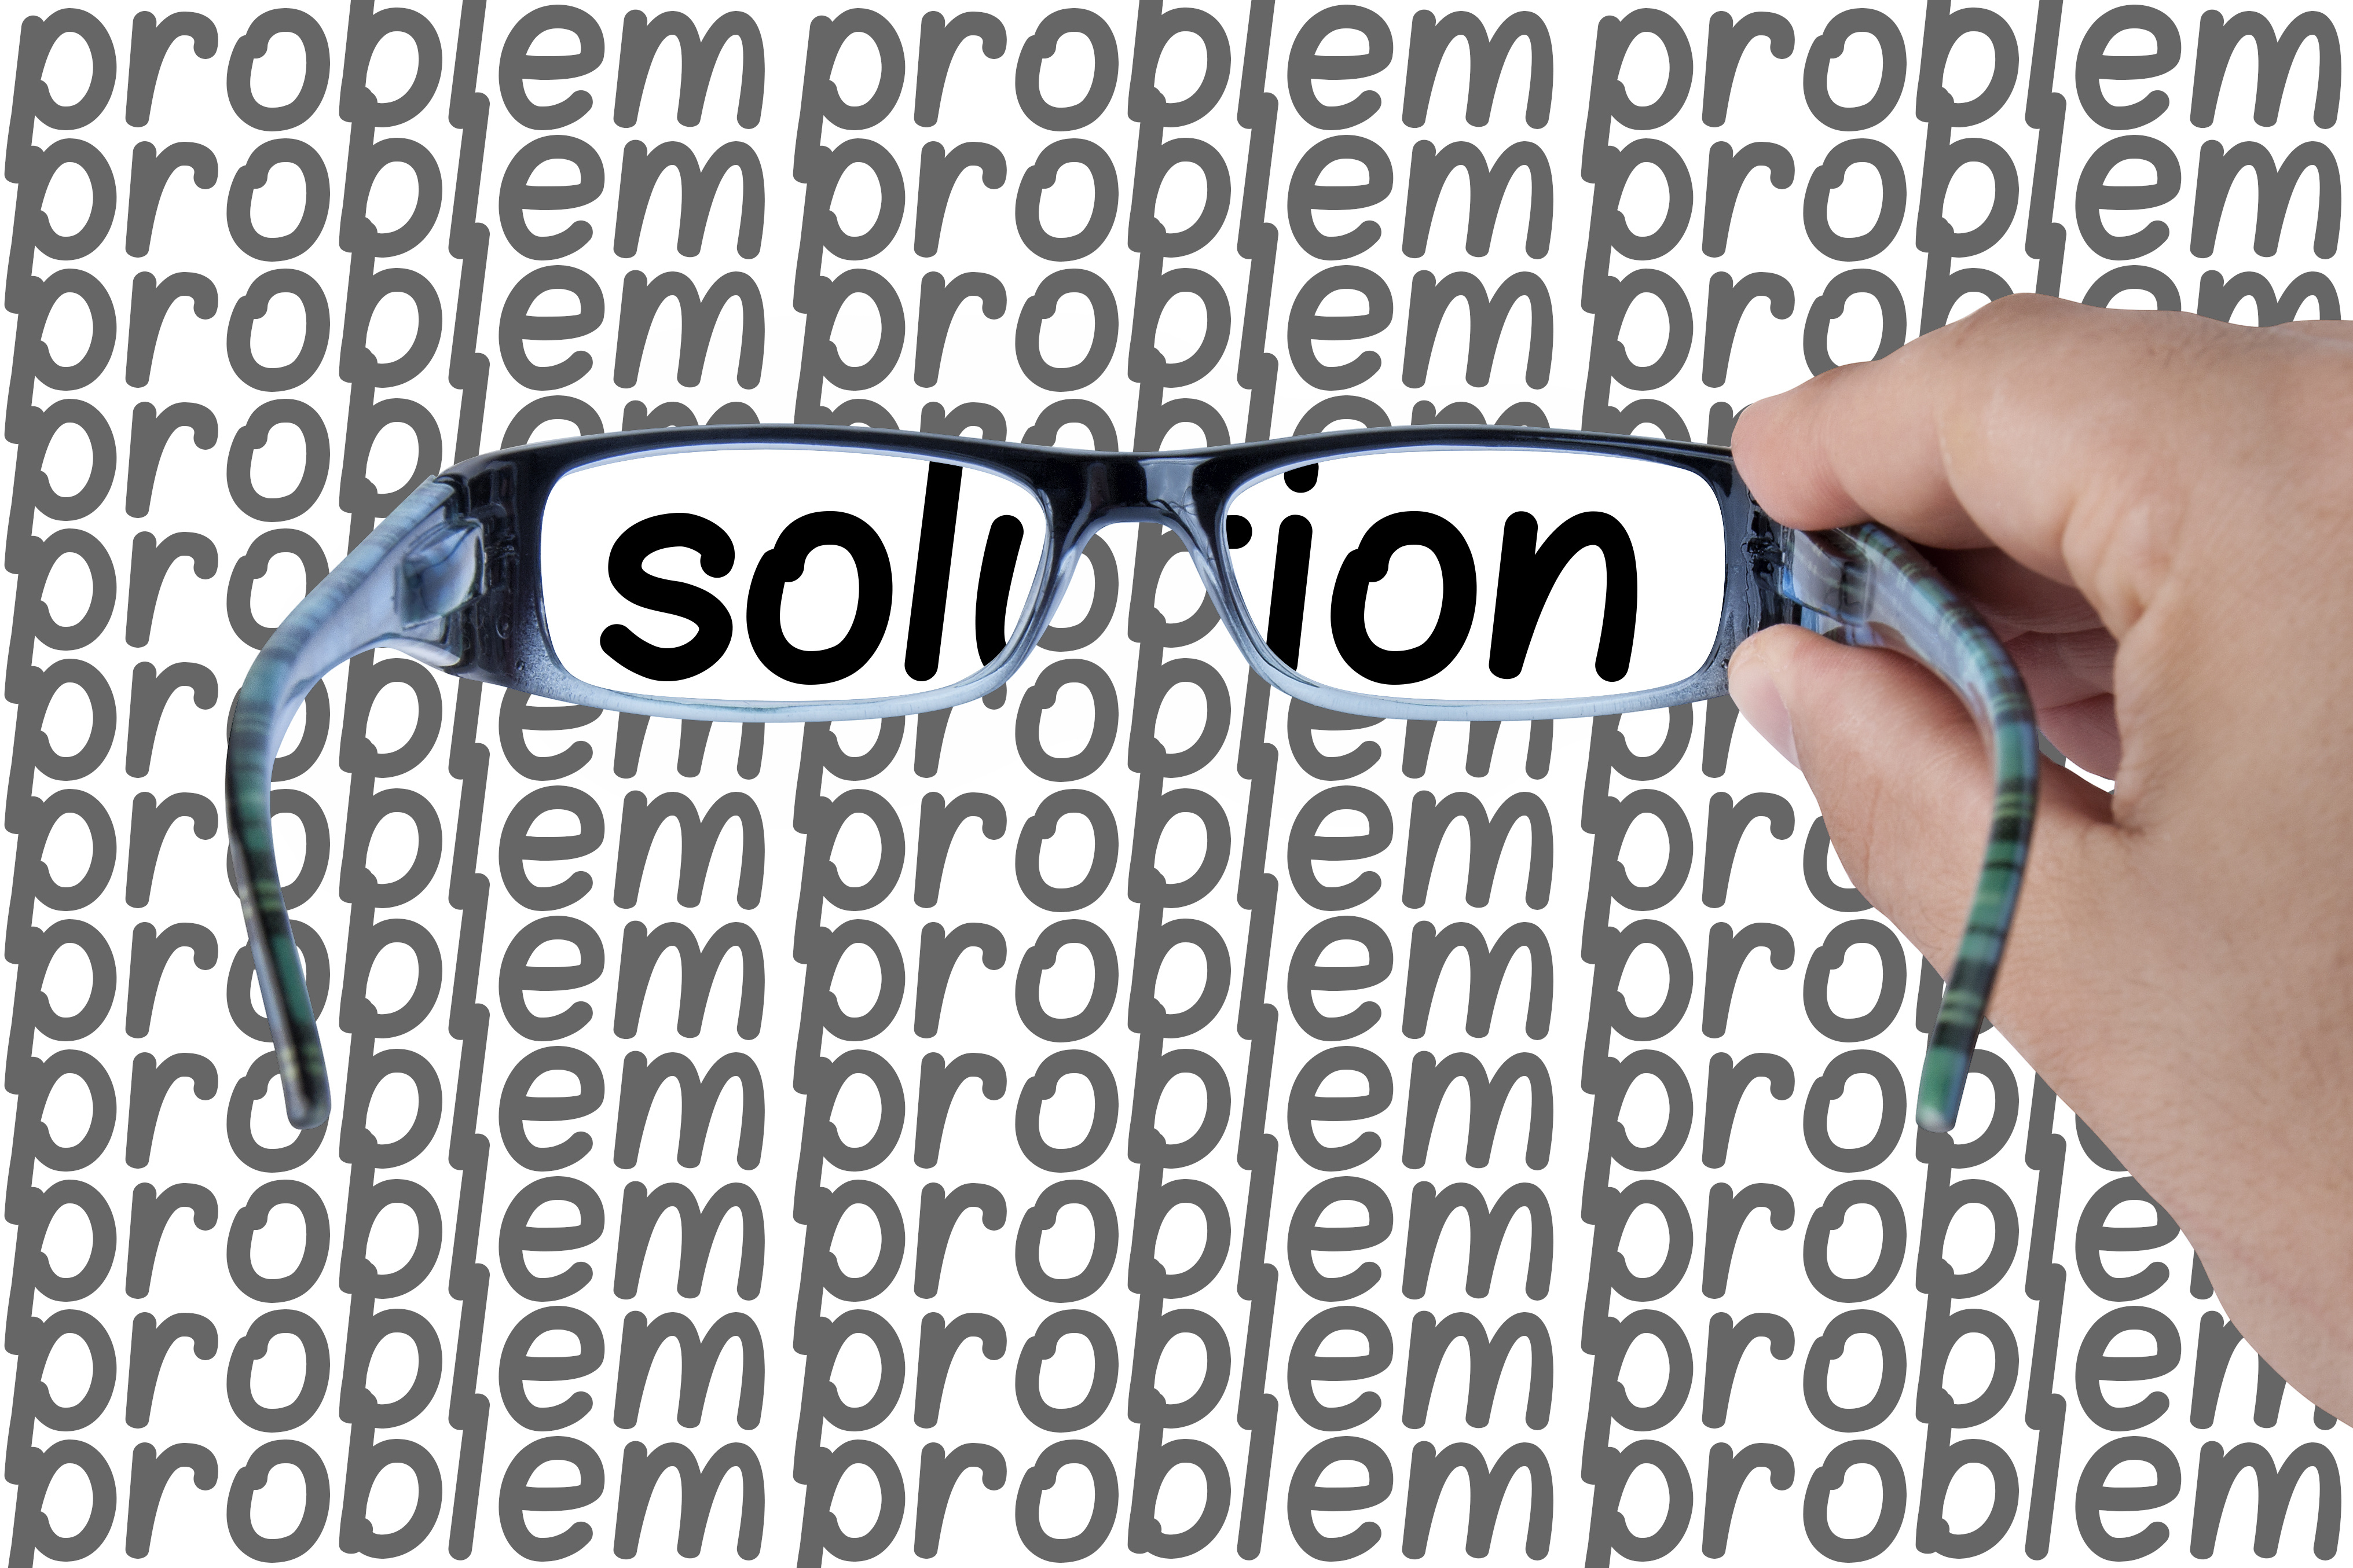 hand solding glasses over the words problem